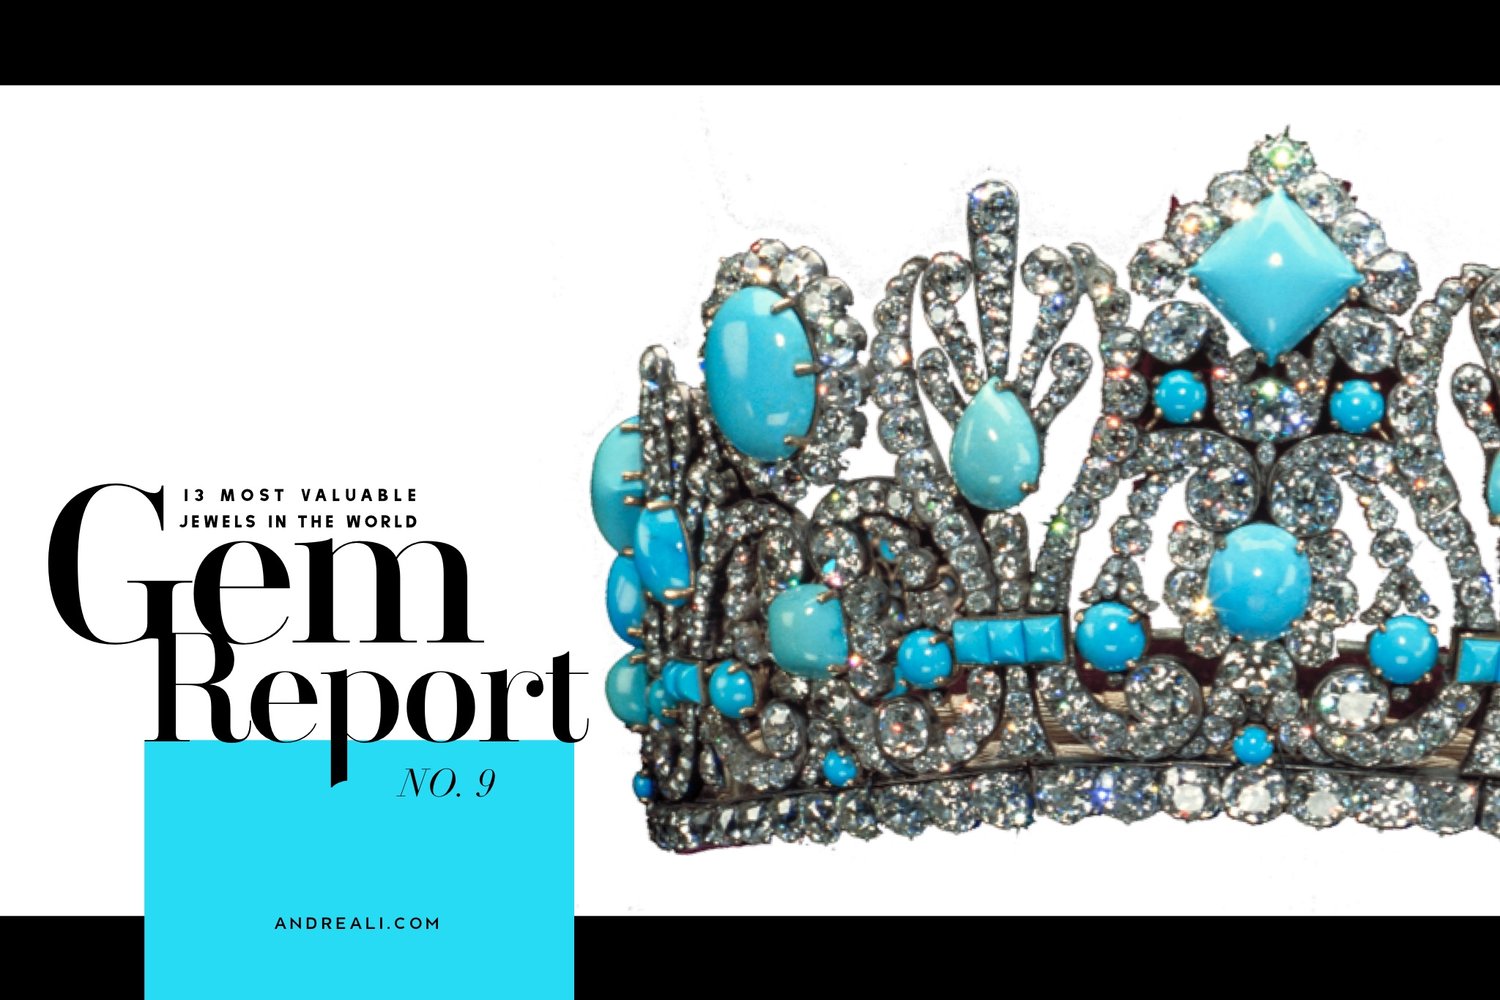 13 Of The Most Jewels In the World - 9th Diadem ANDREA LI